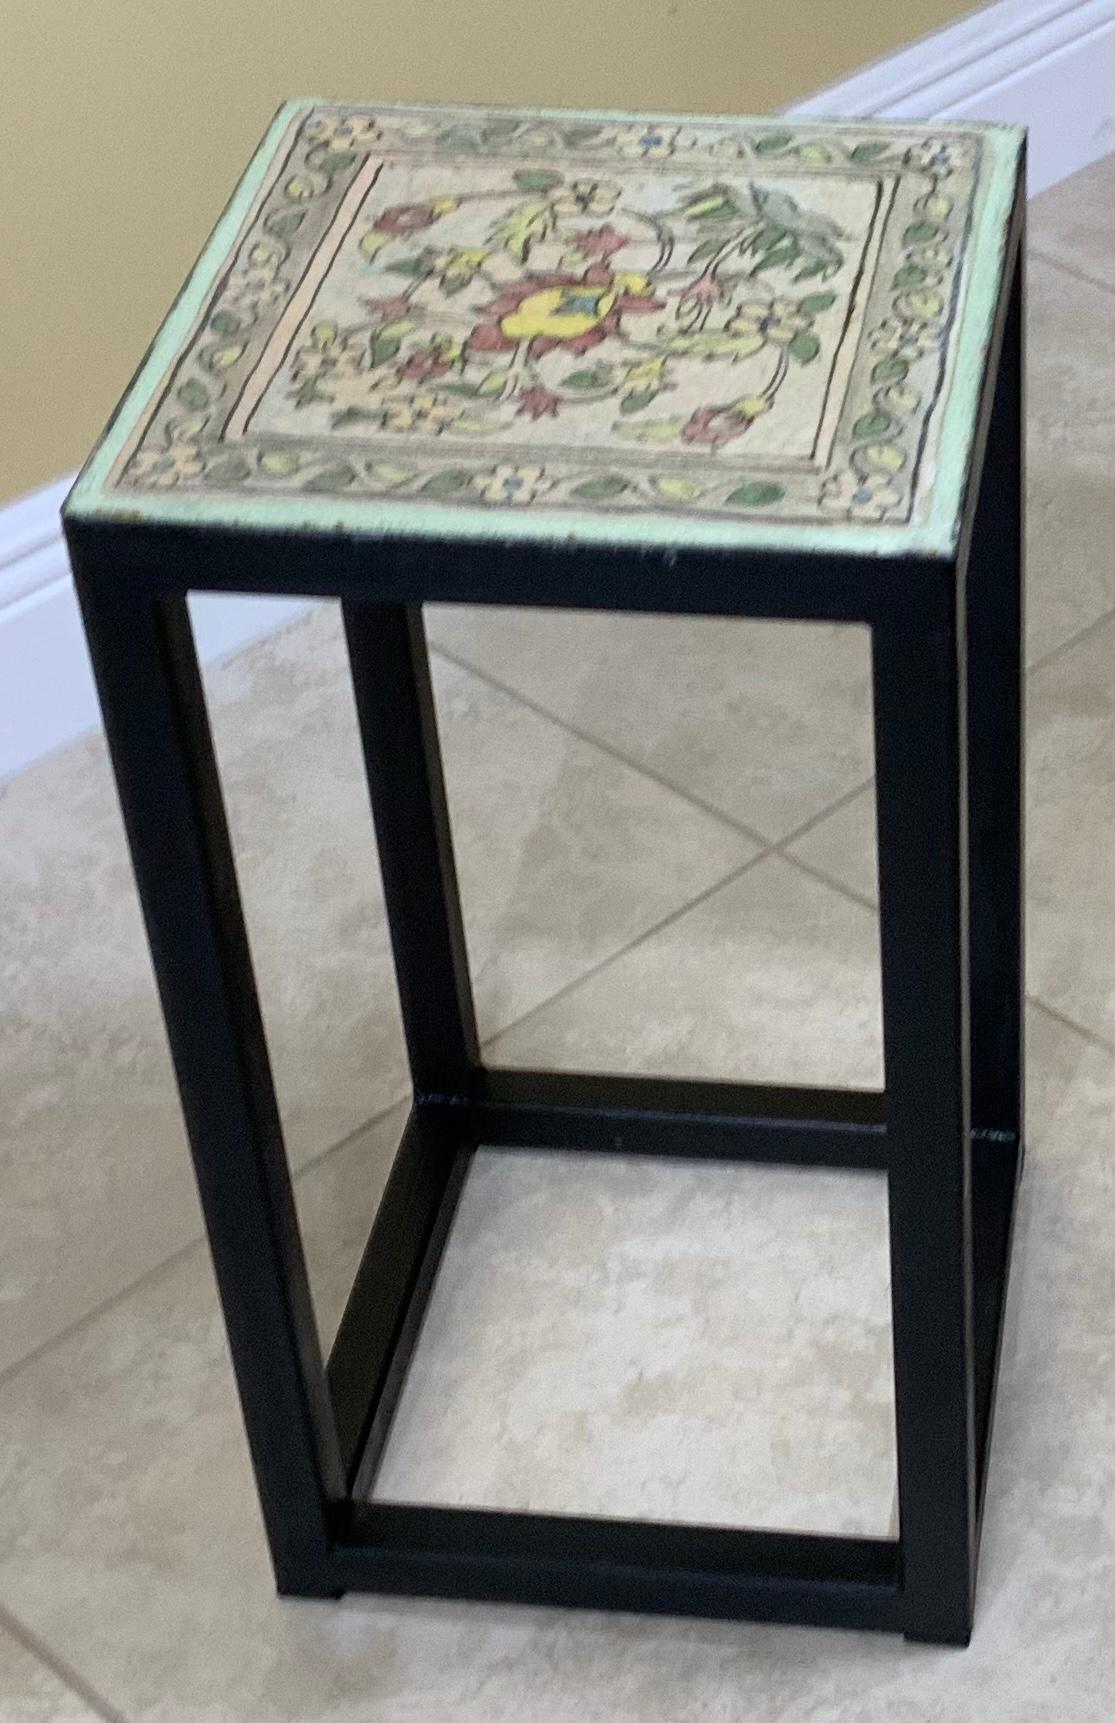 Elegant side table made of beautiful vintage hand painted and glazed ceramic tile, of floral and vine motif in blue green colors, professionally mounted on steel base painted in black. Decorative functional side table, also light to move.